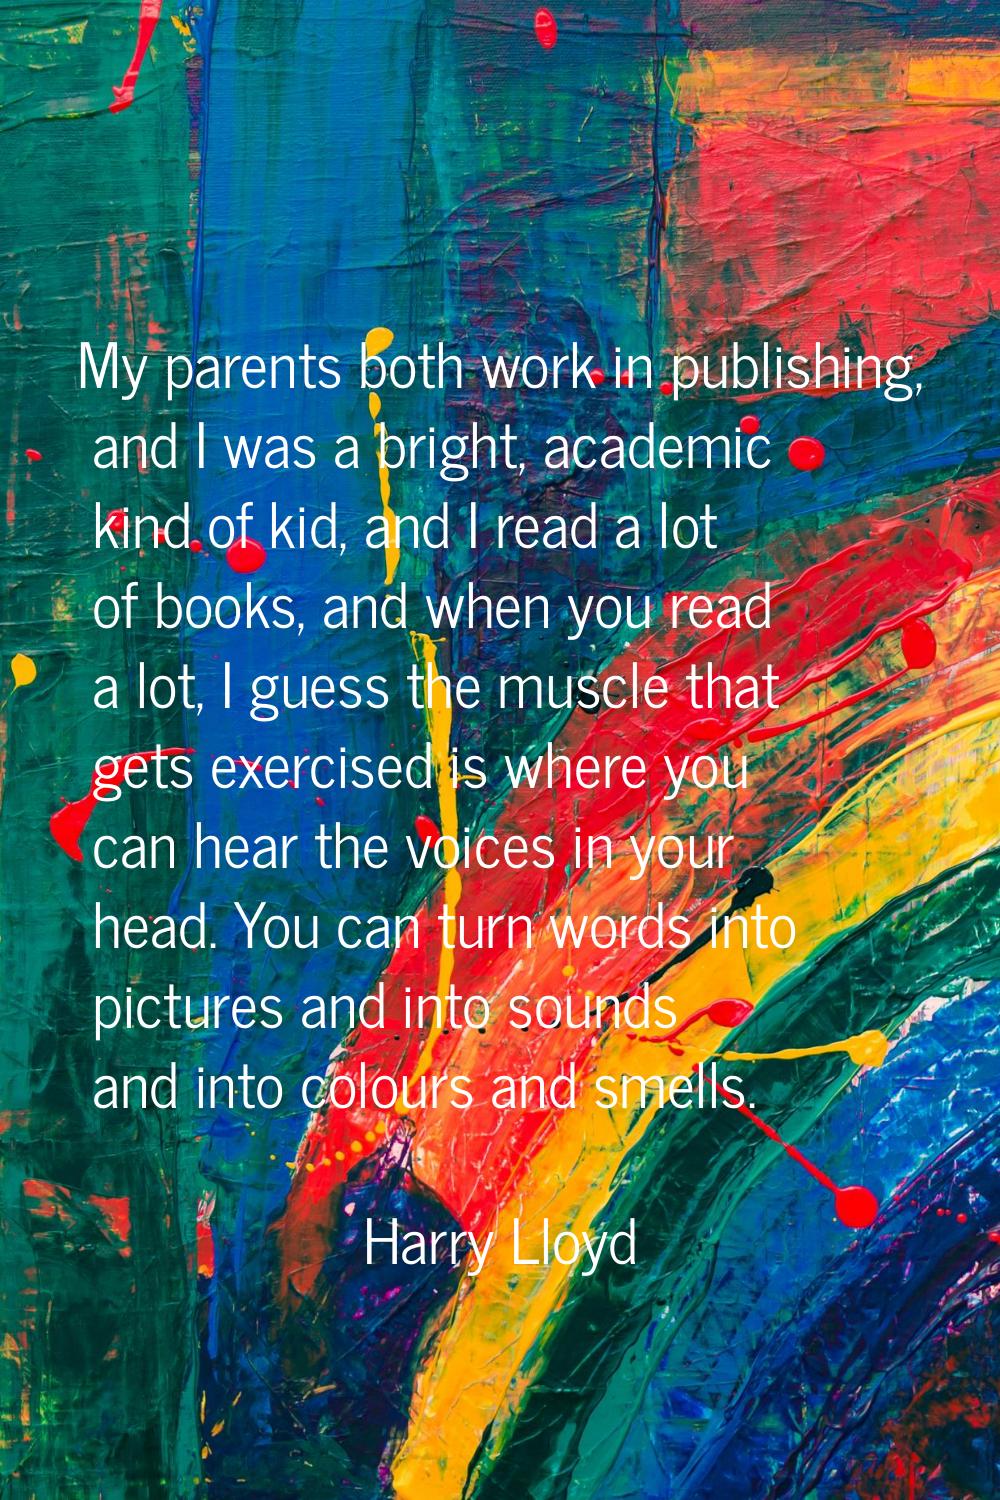 My parents both work in publishing, and I was a bright, academic kind of kid, and I read a lot of b